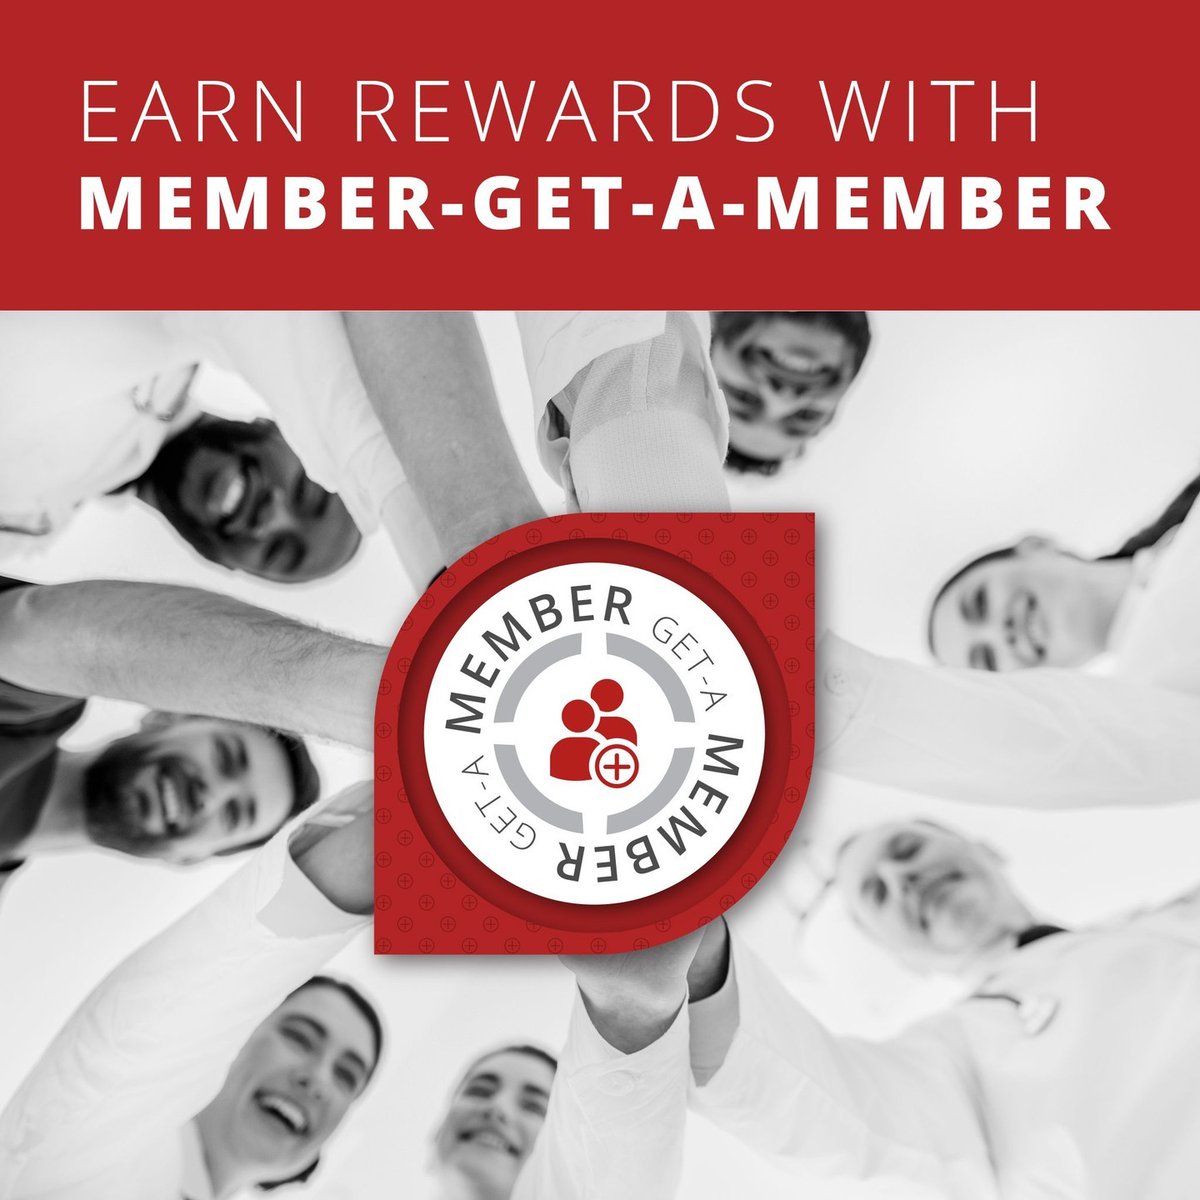 ASLMS members - get rewarded for recruiting new members with Member-Get-A-Member. The more members you refer, the more rewards you can earn. Learn more and start referring today at the link in our bio. #ASLMS #MemberGetAMember #membership #refernow dlvr.it/T7Vr0X